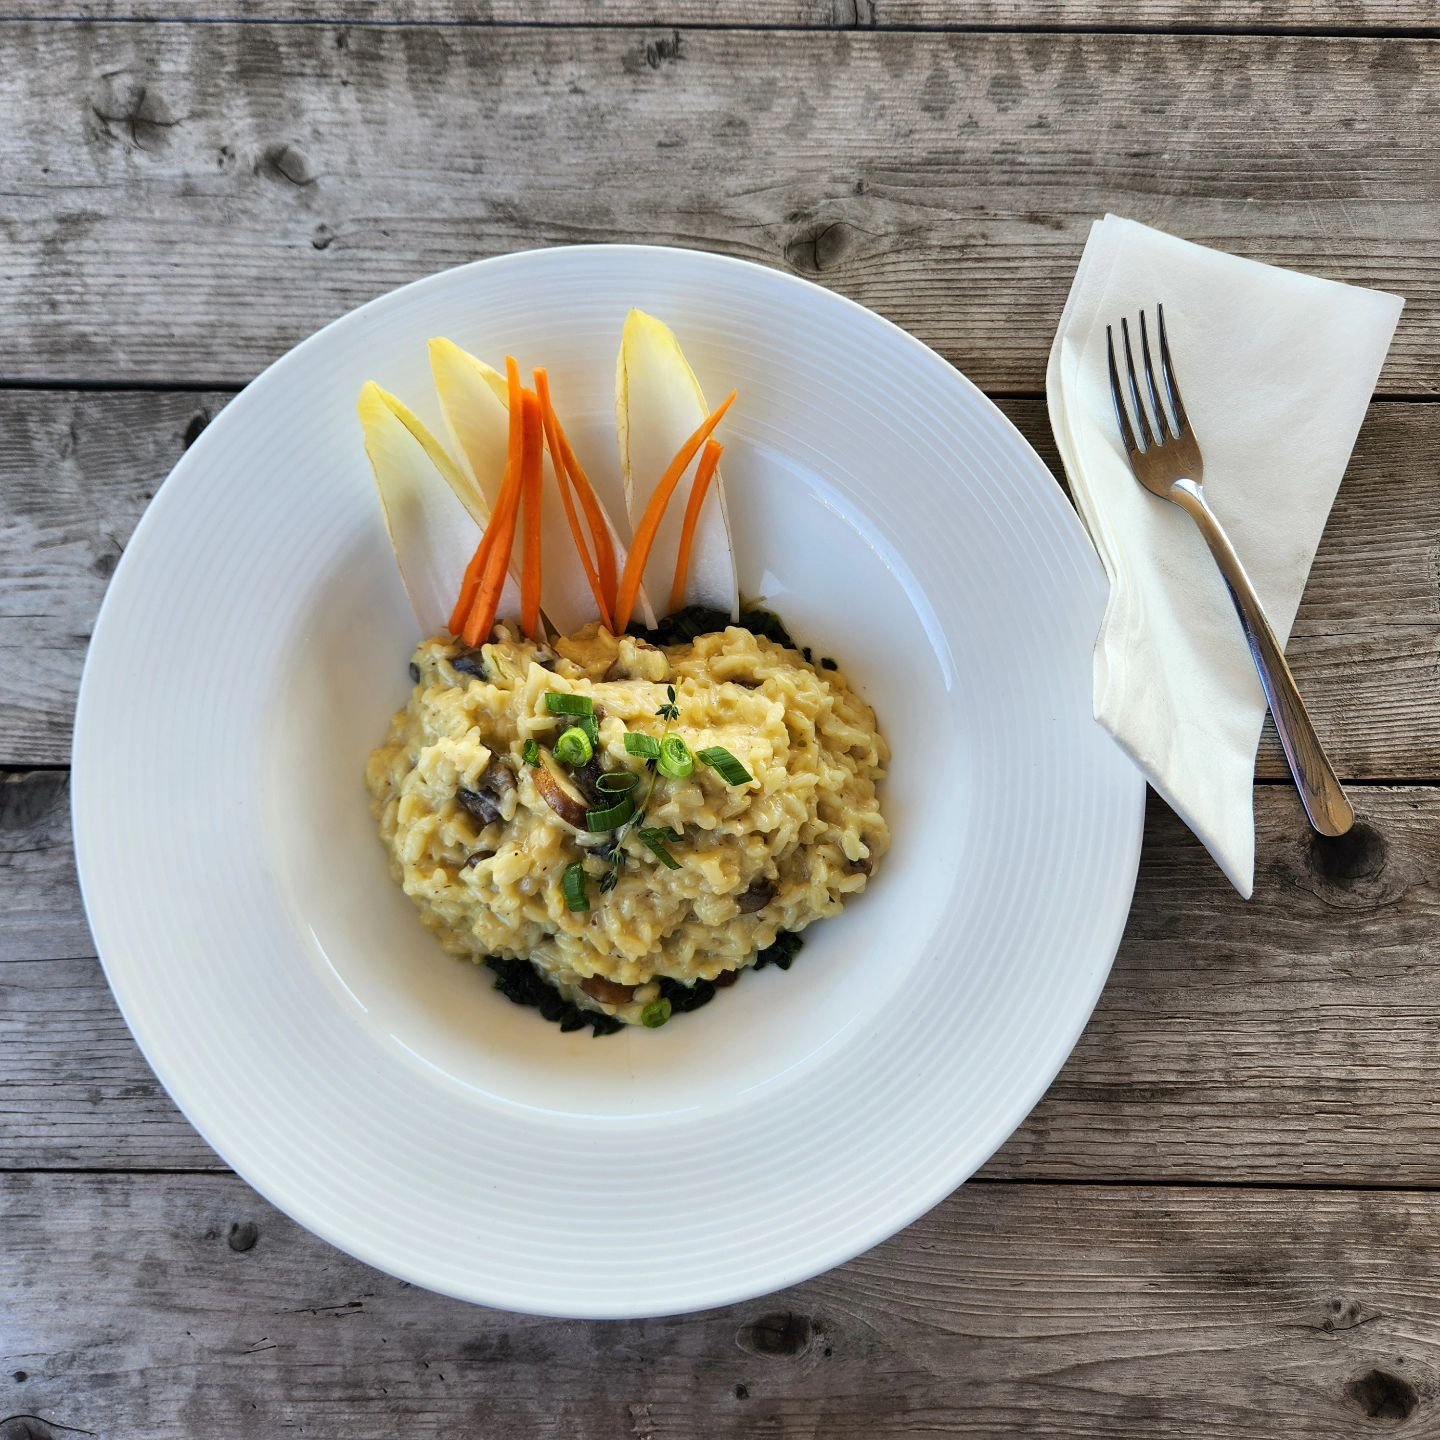 Authentic Creamy Mushroom Risotto for our catering 

#cateringservices #cateringevent  #mississaugafood #mississaugarestaurant #Mississauga #mississaugaeats #etobicokefood #etobicokeeats #gtafoodie #gtafood #bramptonfood #risottolover #risottorecipe 